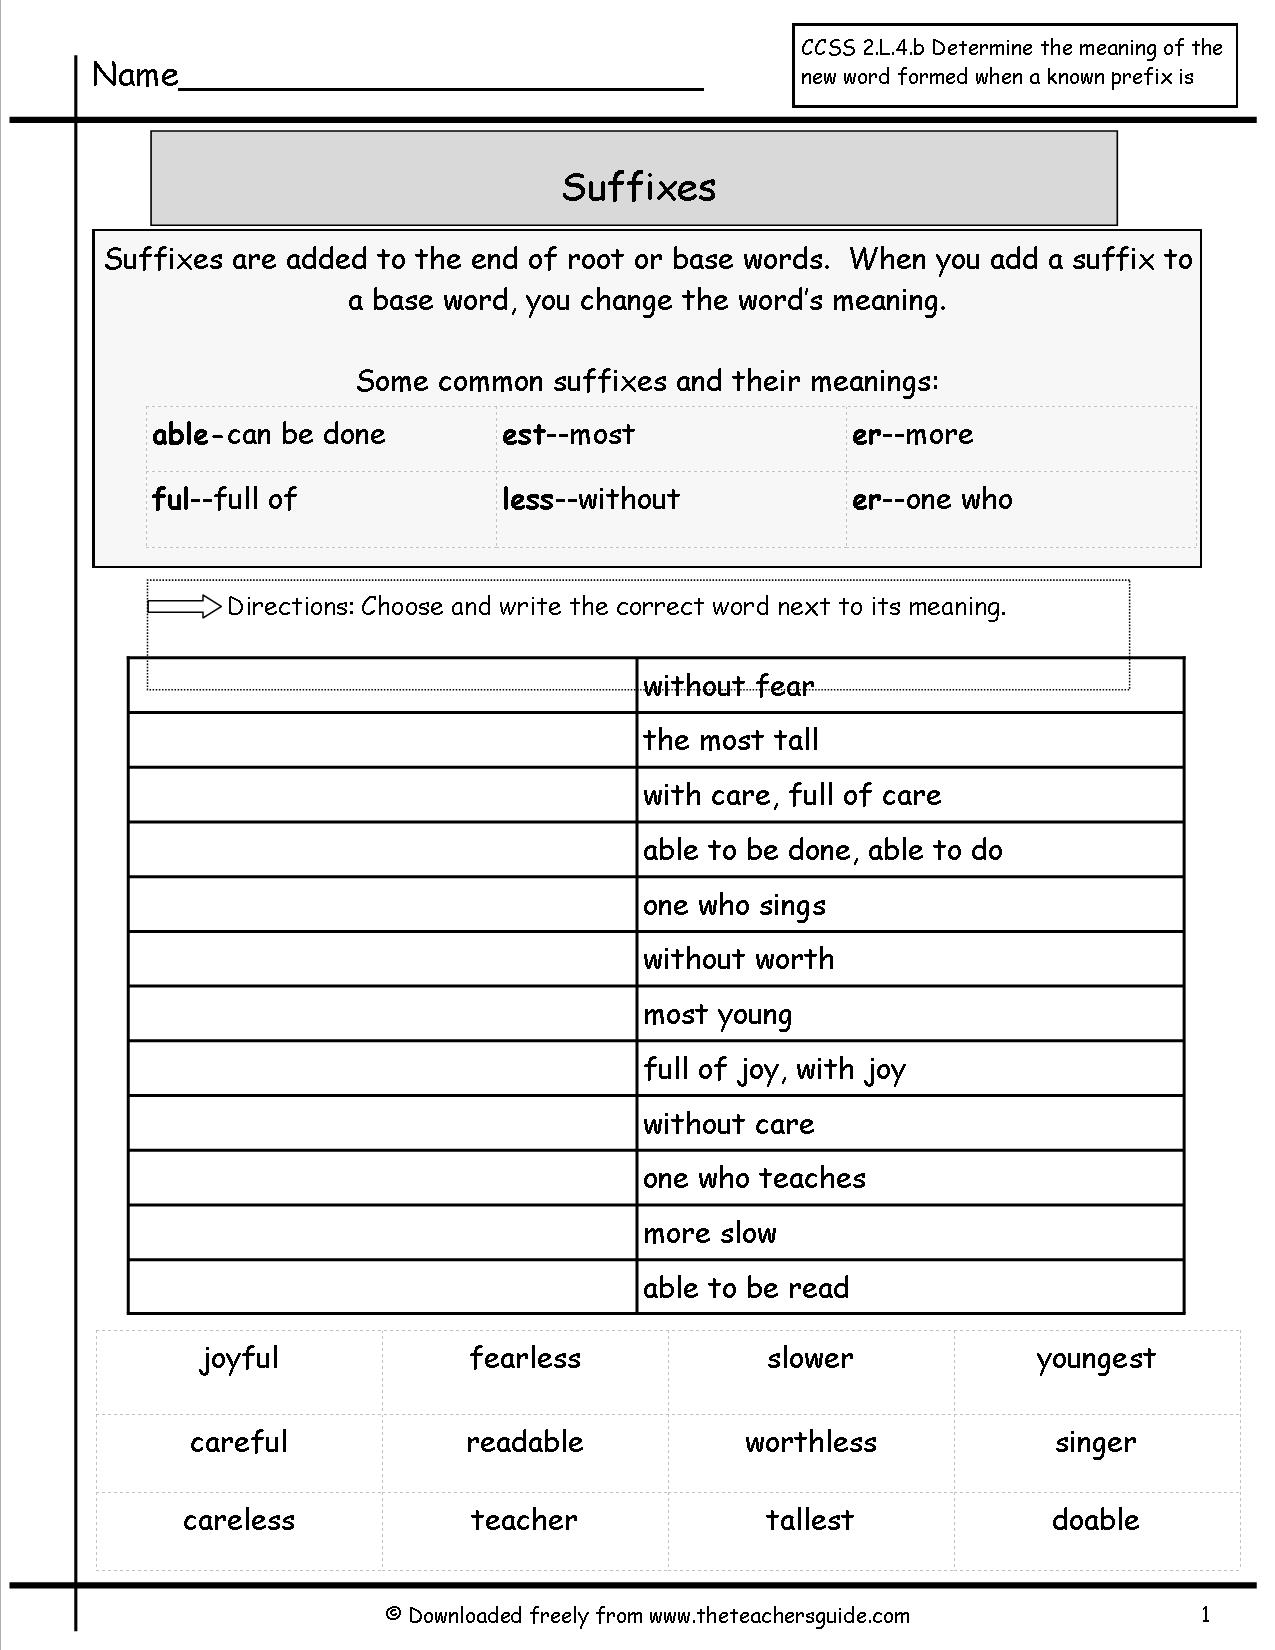 Prefix and Suffix Worksheet 5th Grade Image